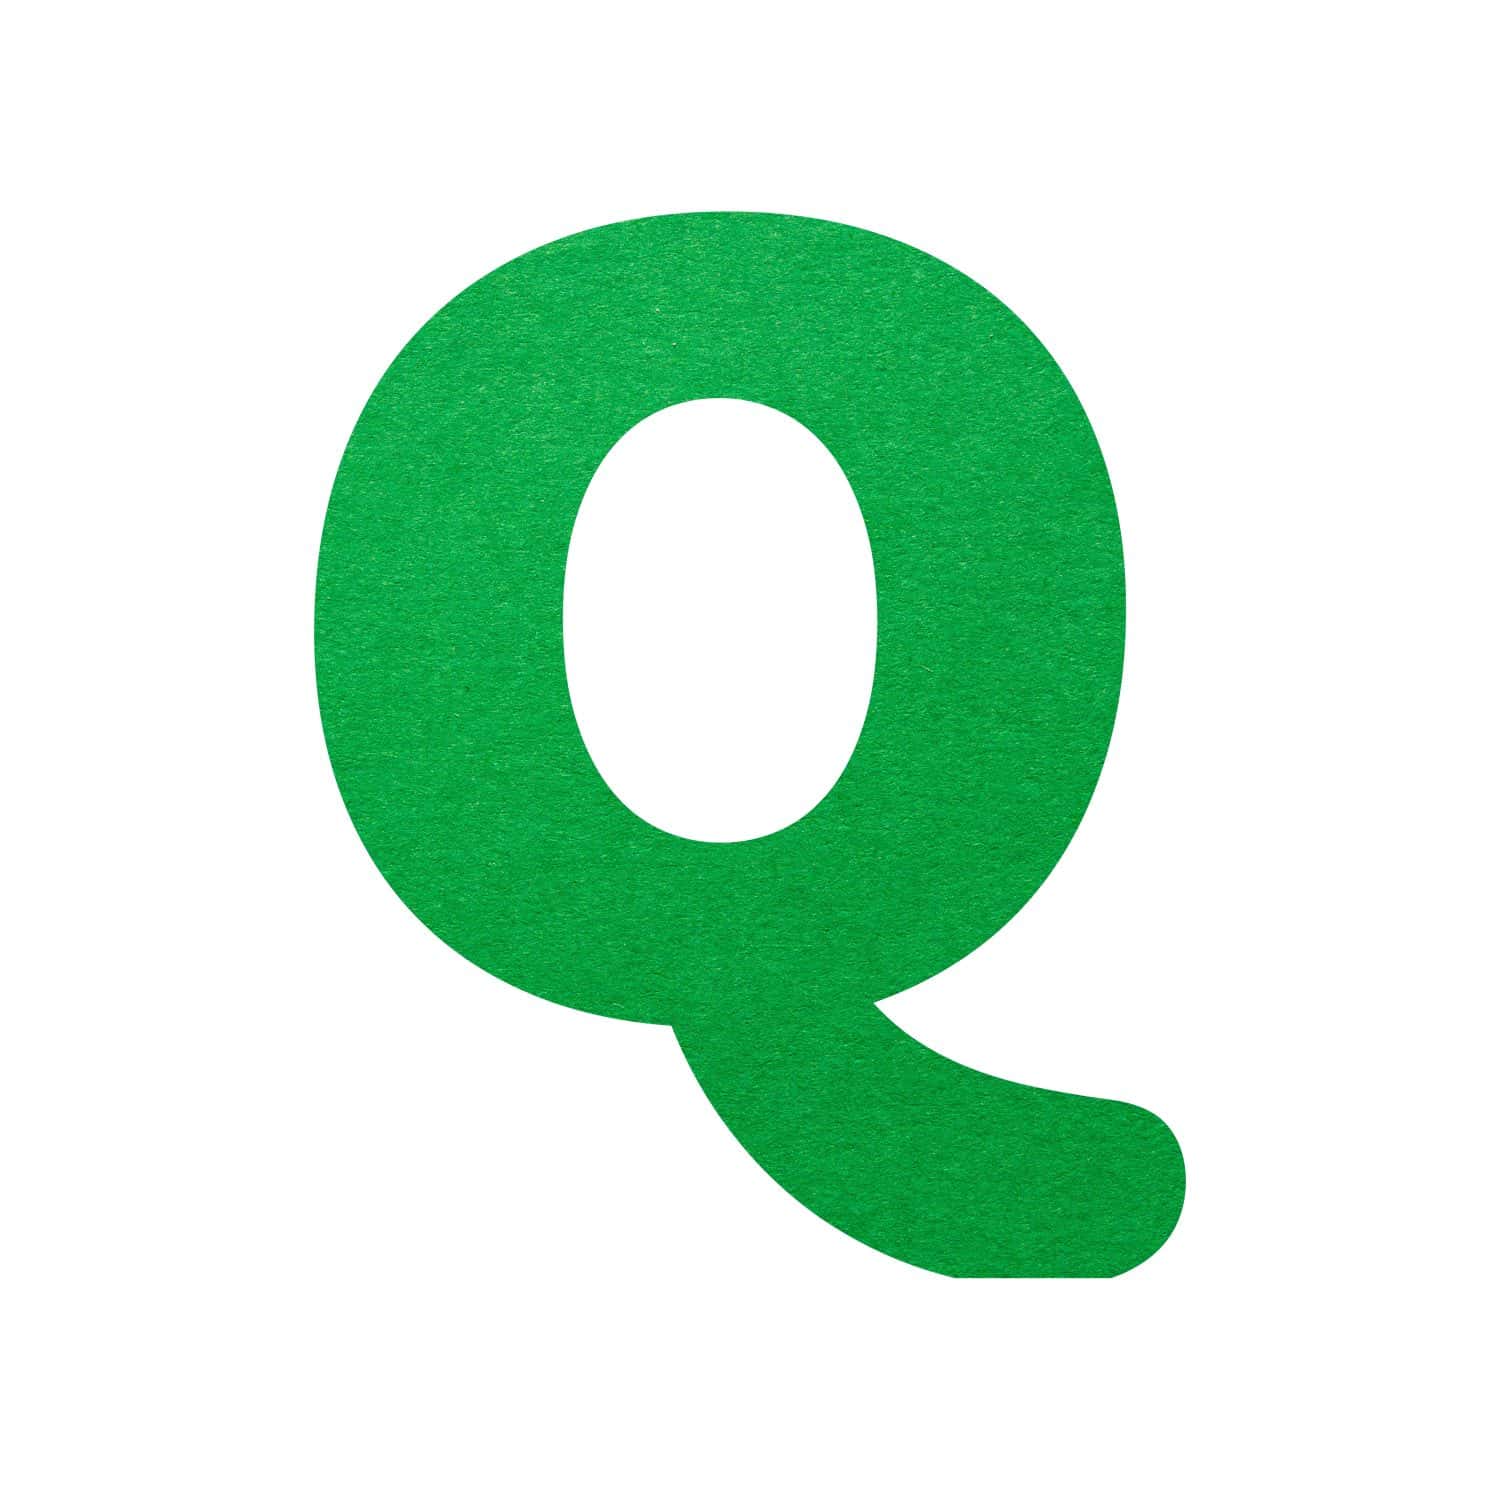 Green paper letter Q isolated on white background. Alphabet series.